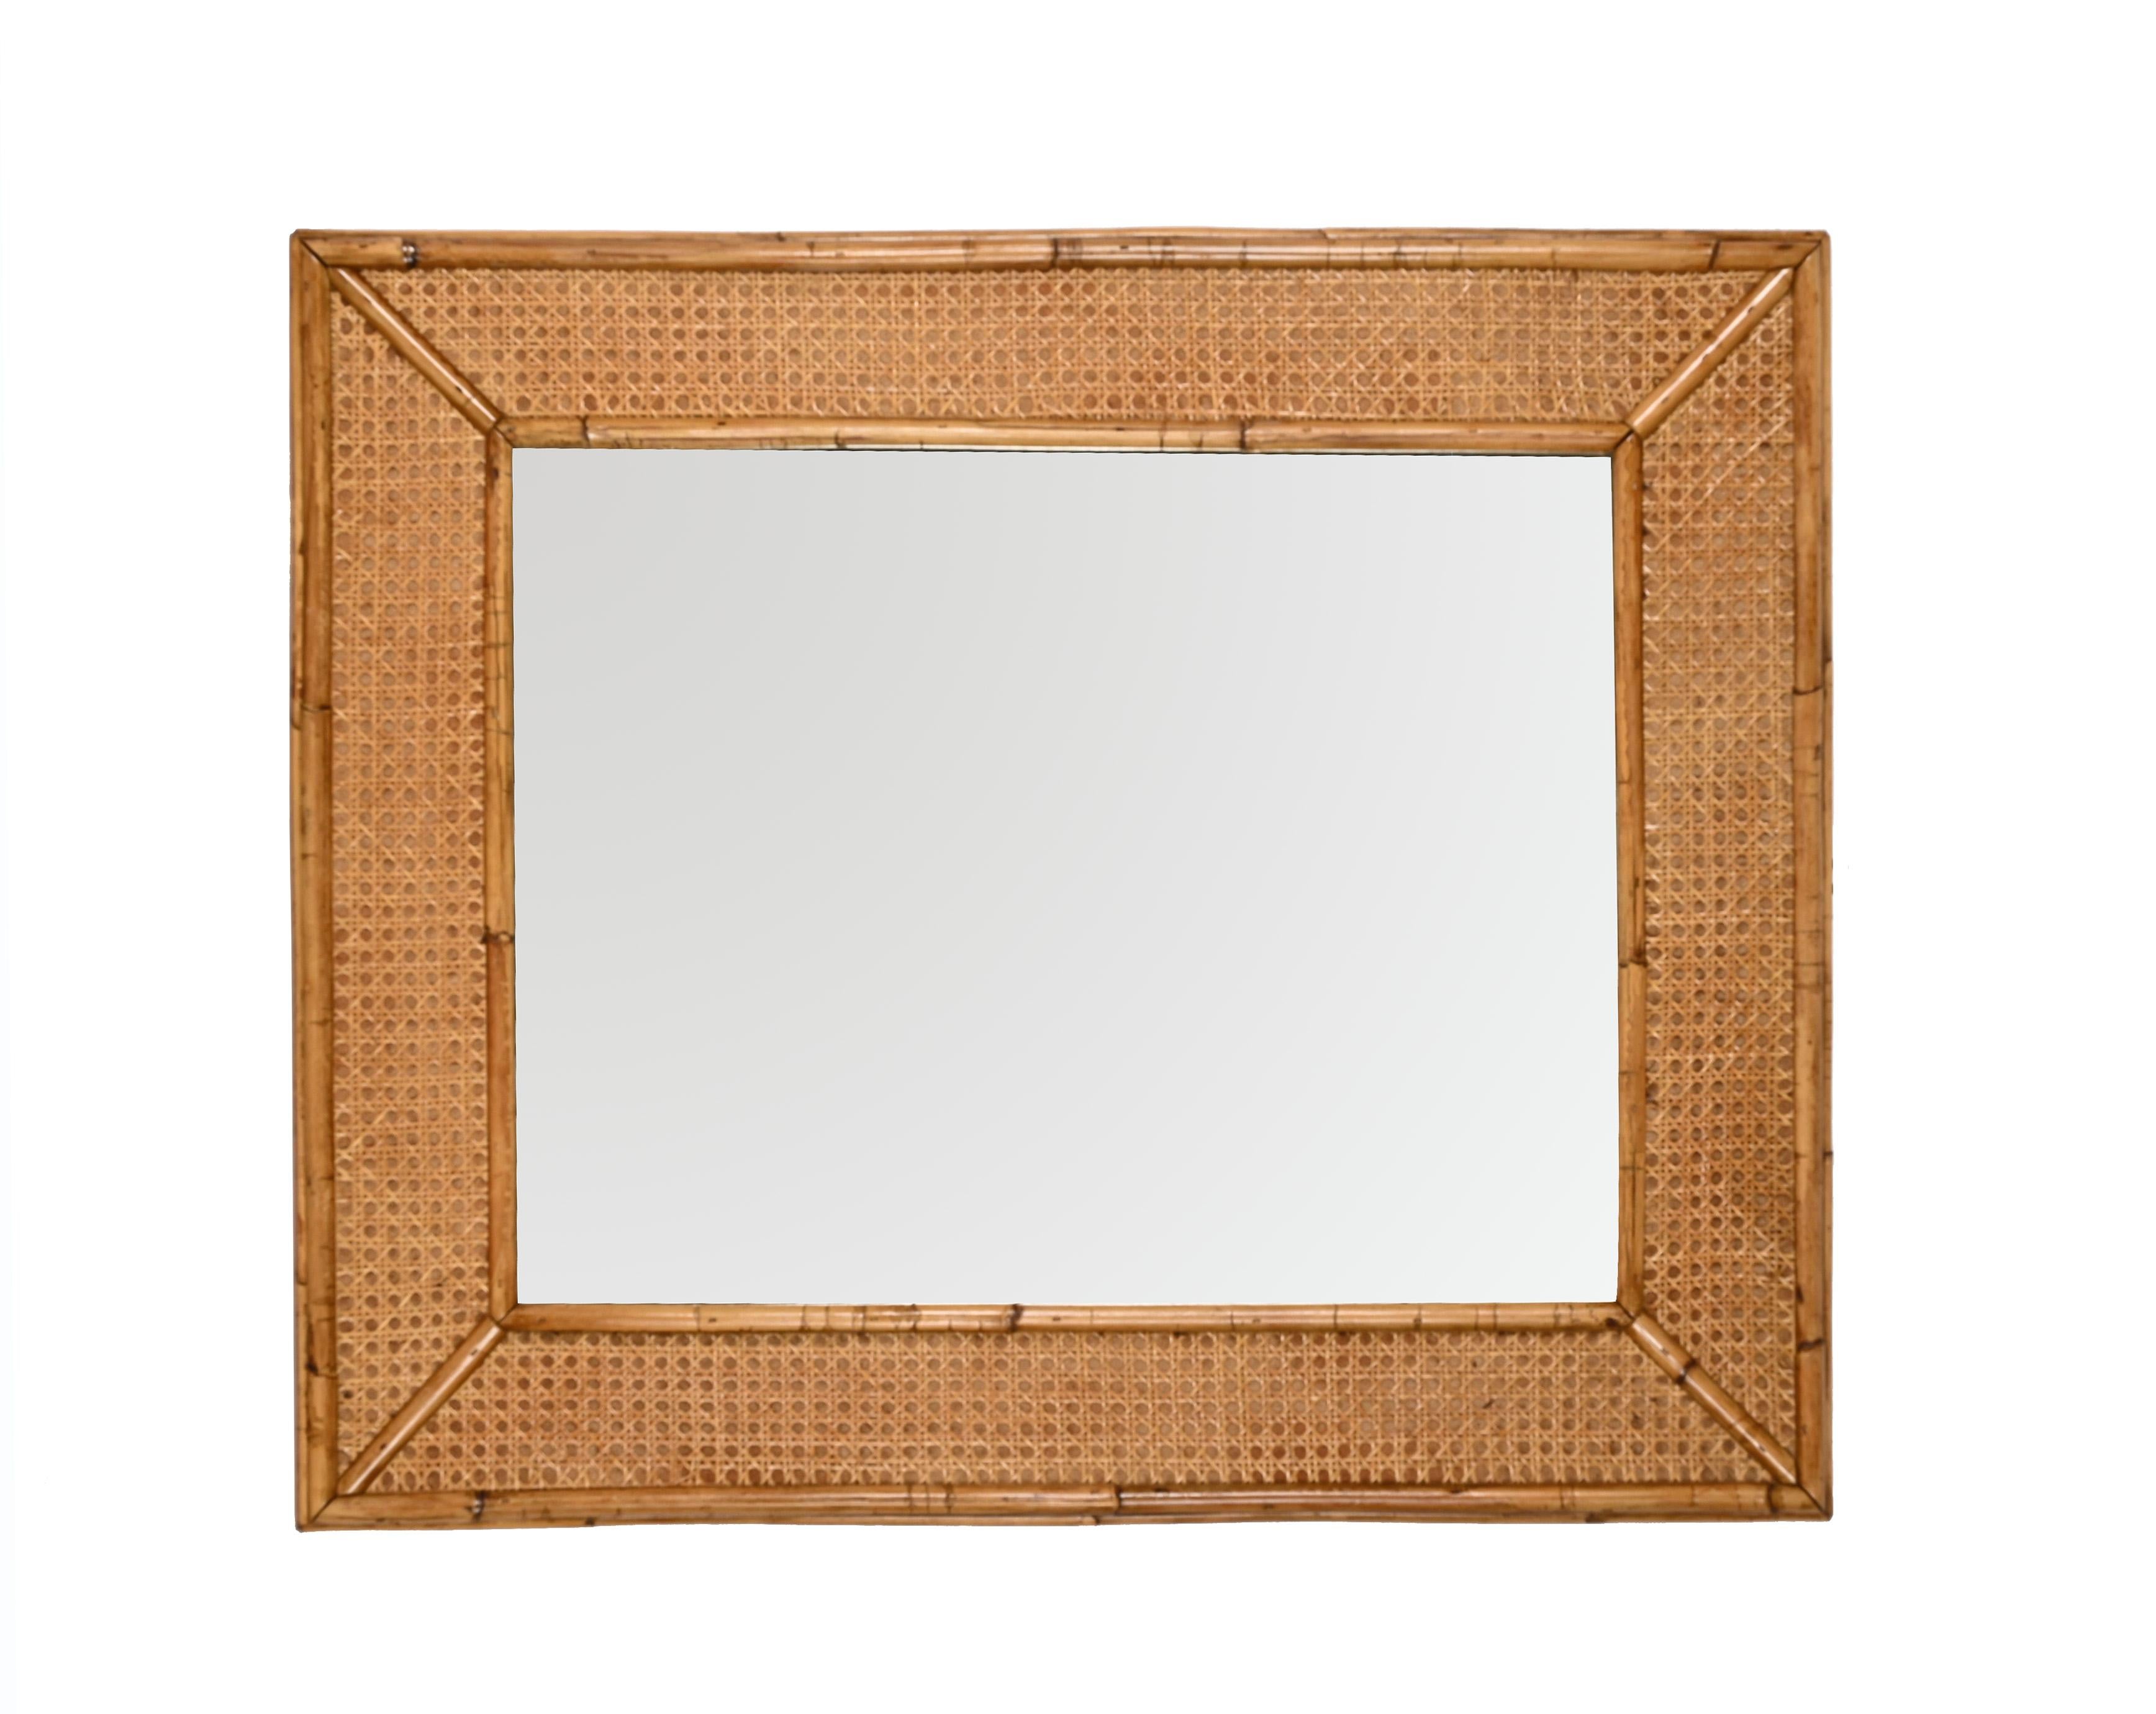 Midcentury Rectangular Italian Mirror with Bamboo and Vienna Straw Frame, 1970s For Sale 12